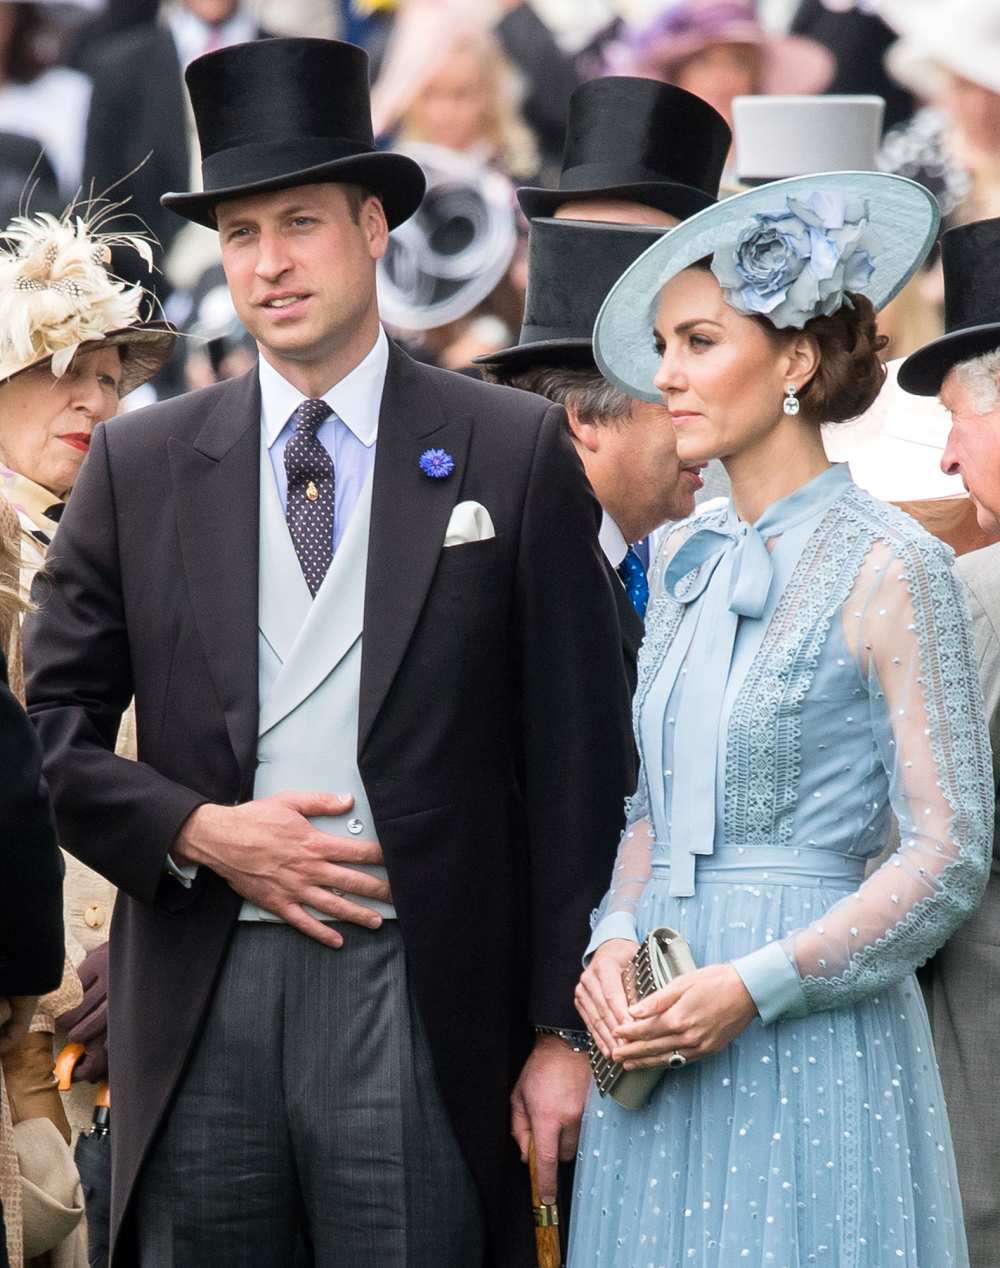 Prince William Wearing A Tux With Tails a Top Hat and Duchess Kate Wearing a Blue Dress With Bow and Blue Hat Fine Dress Royal Ascot